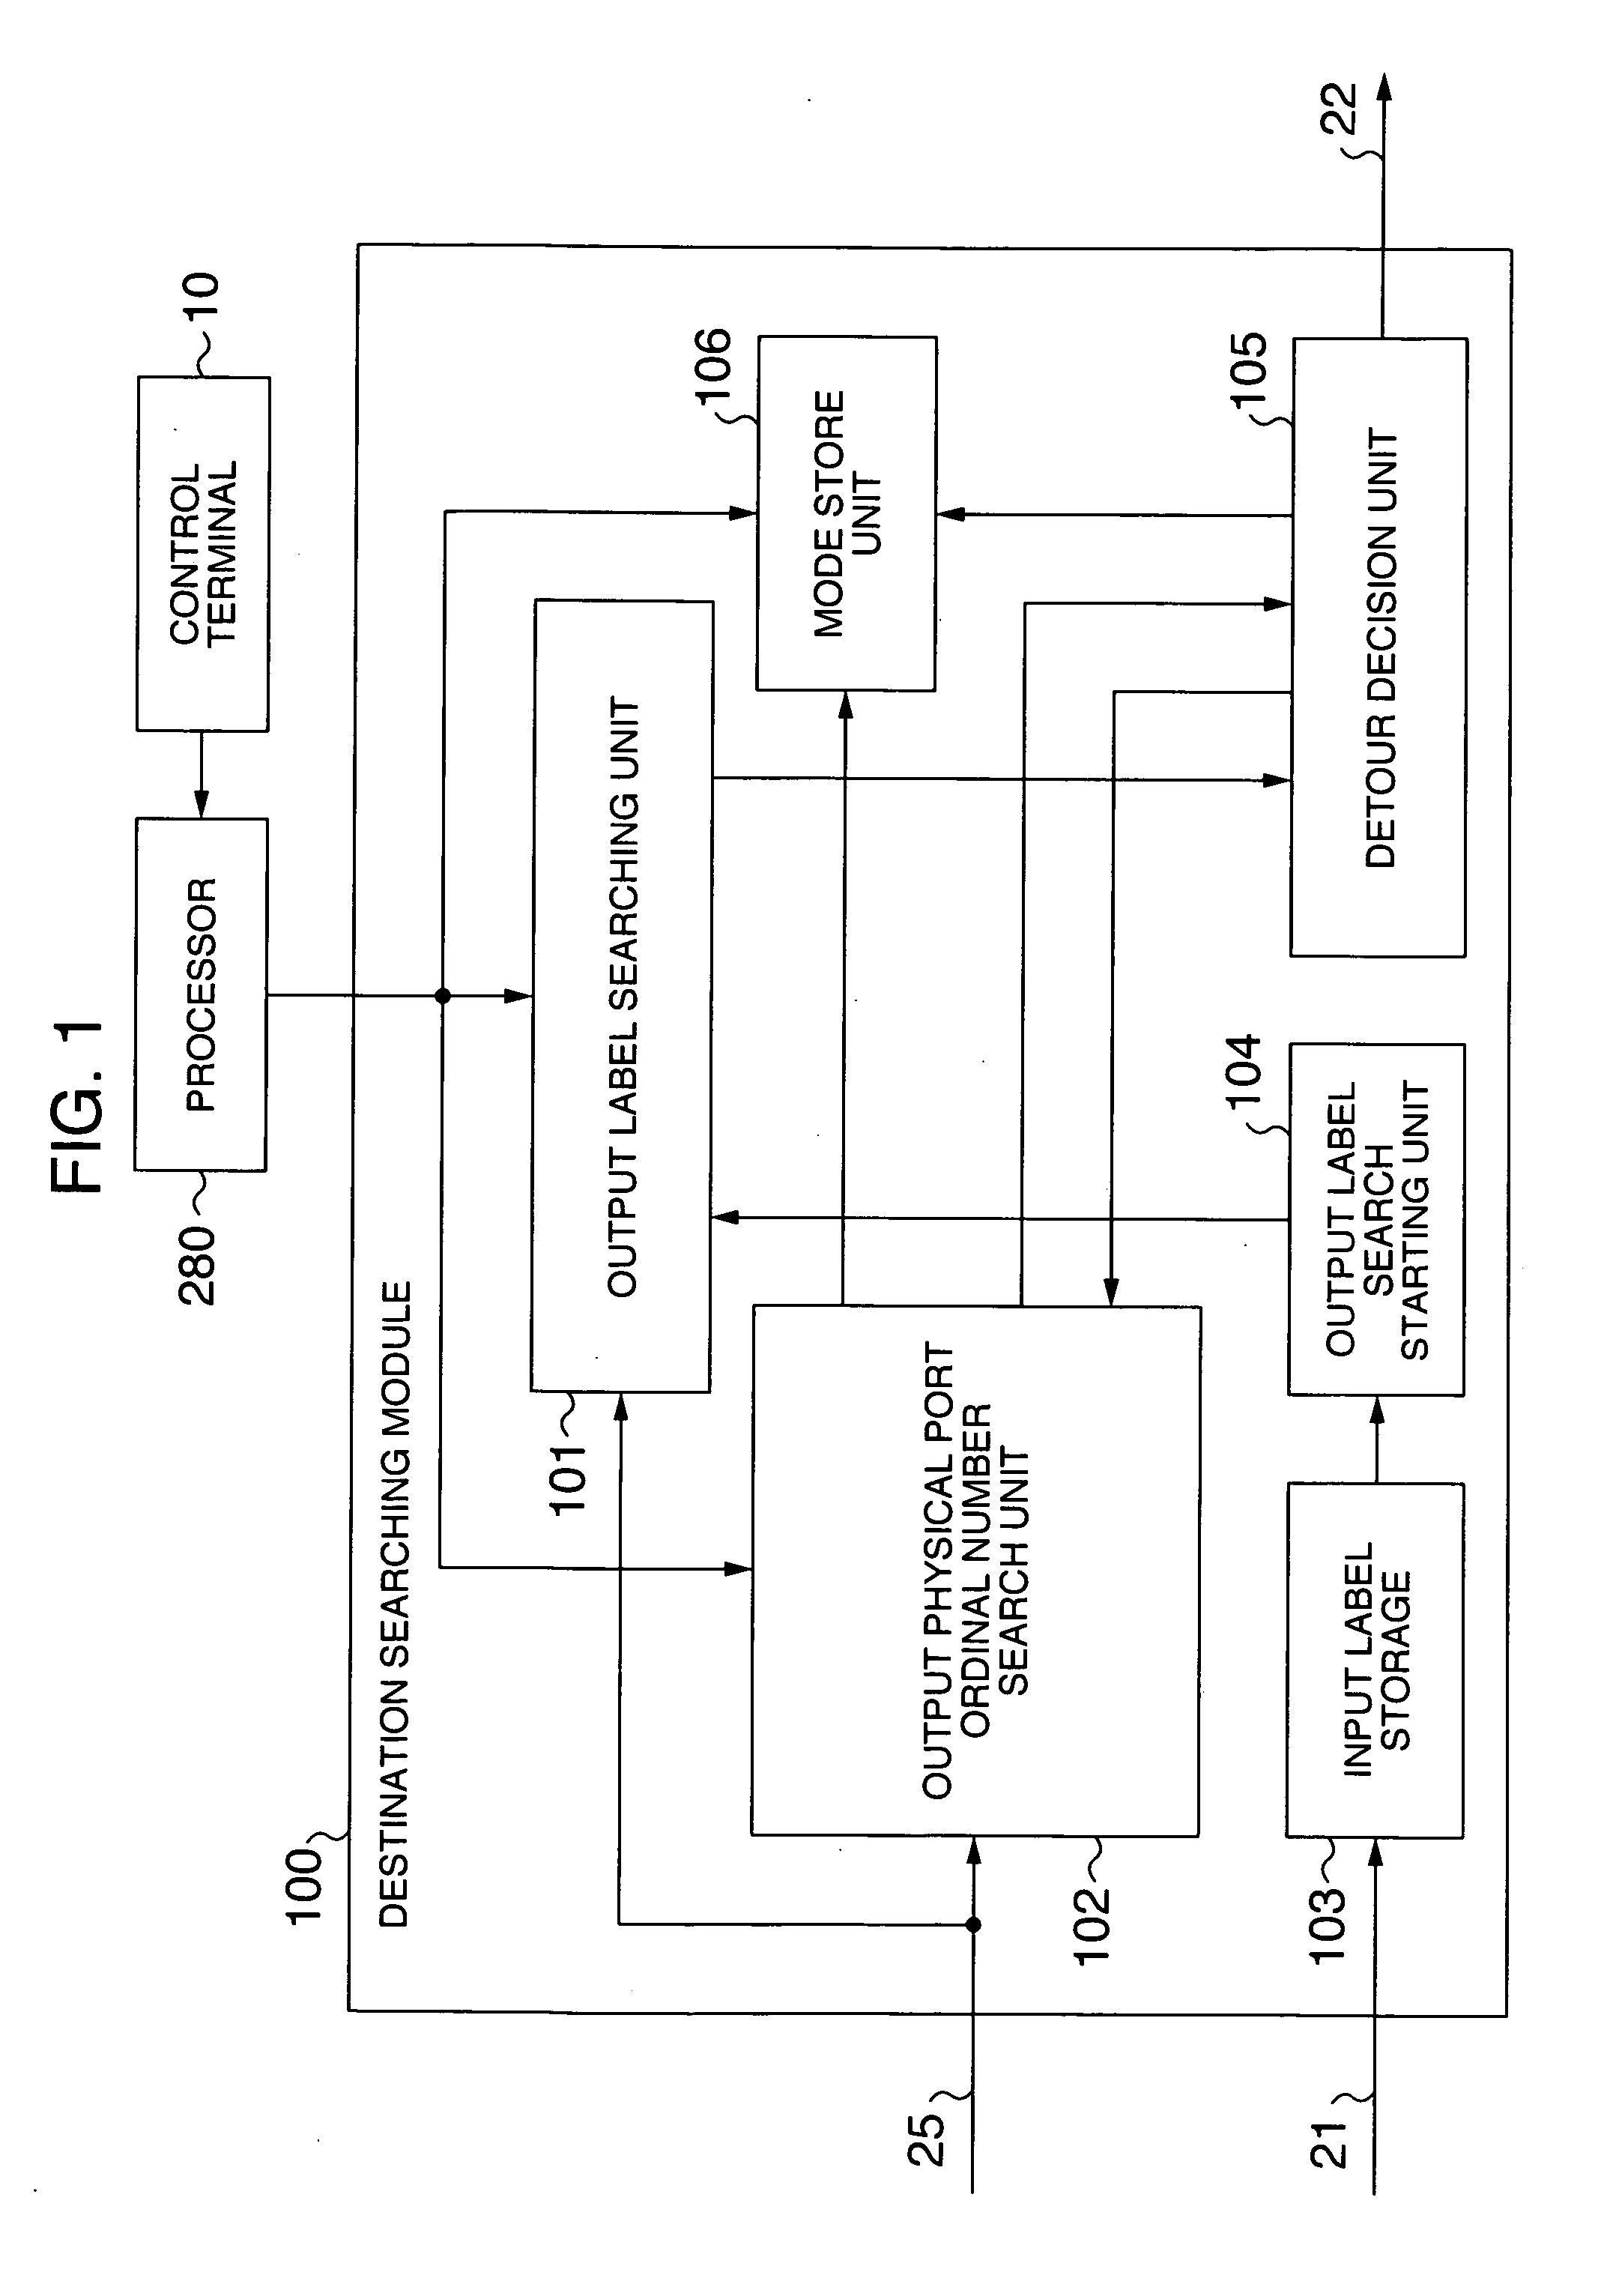 Packet forwarding apparatus with function of diverting traffic